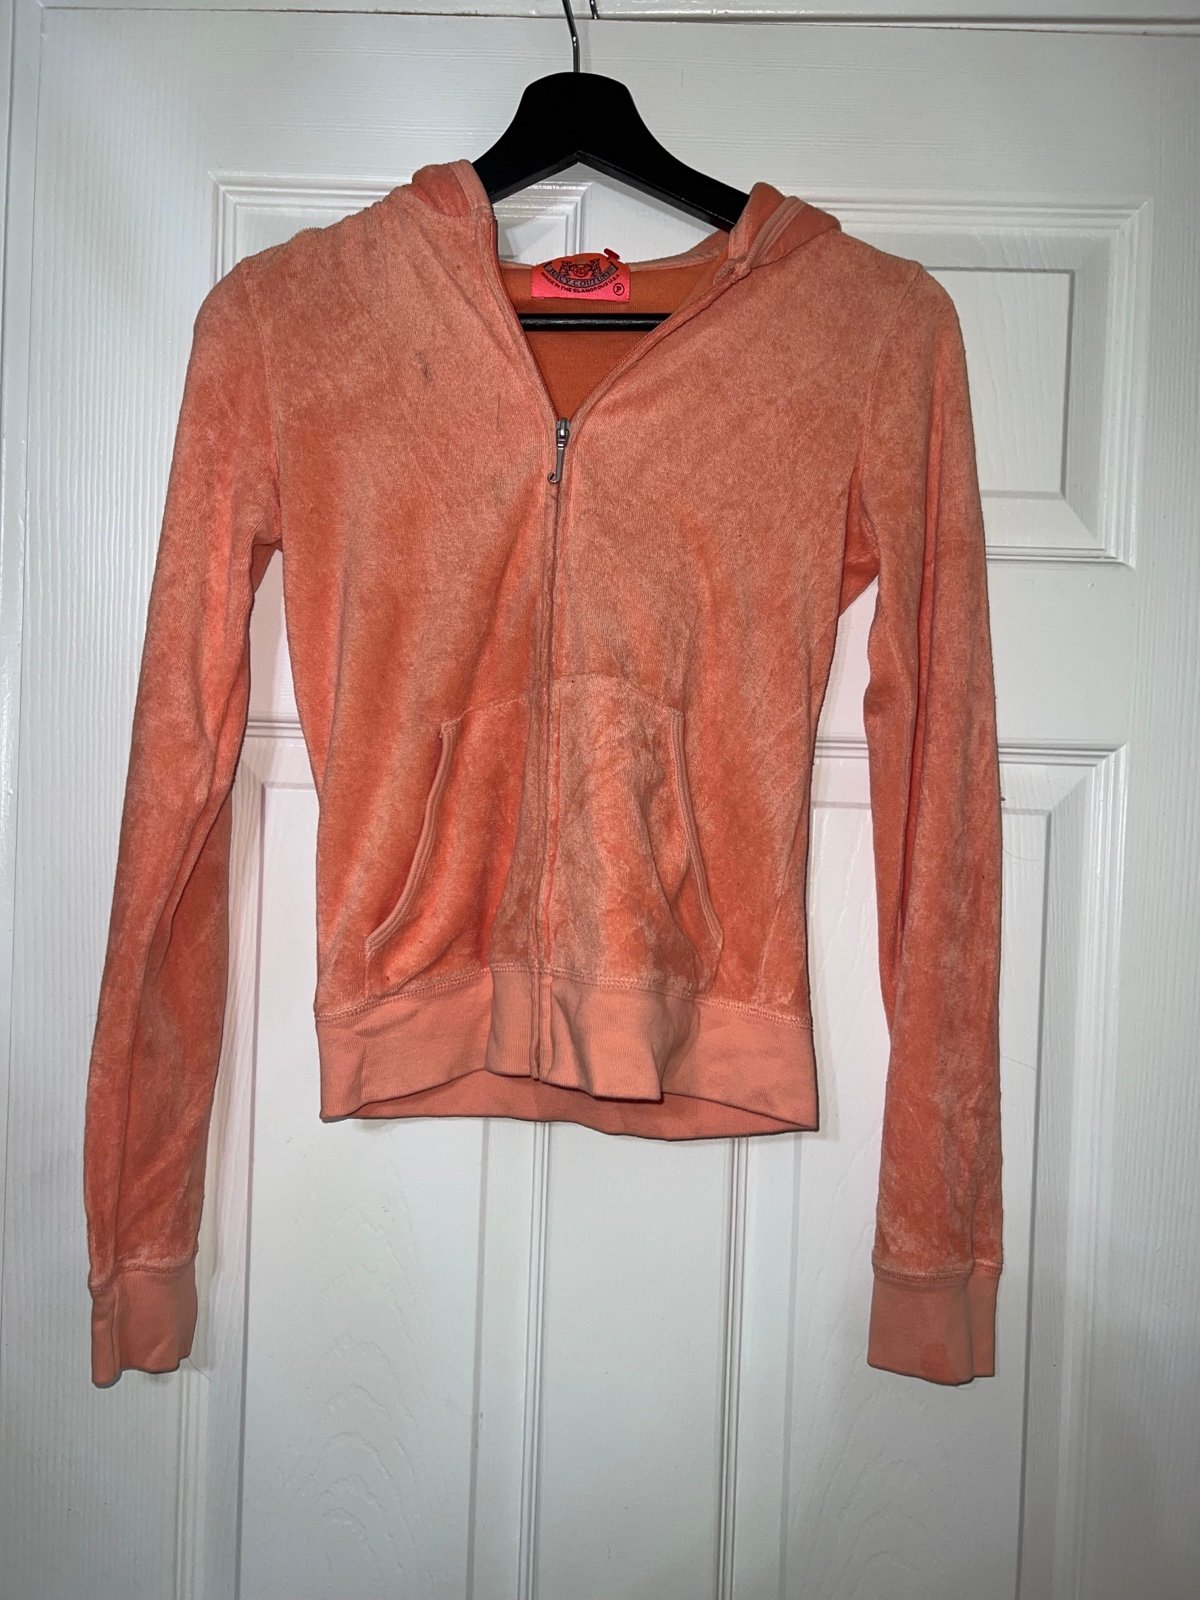 Juicy couture zip up terry cloth 5RU8Xr0xT